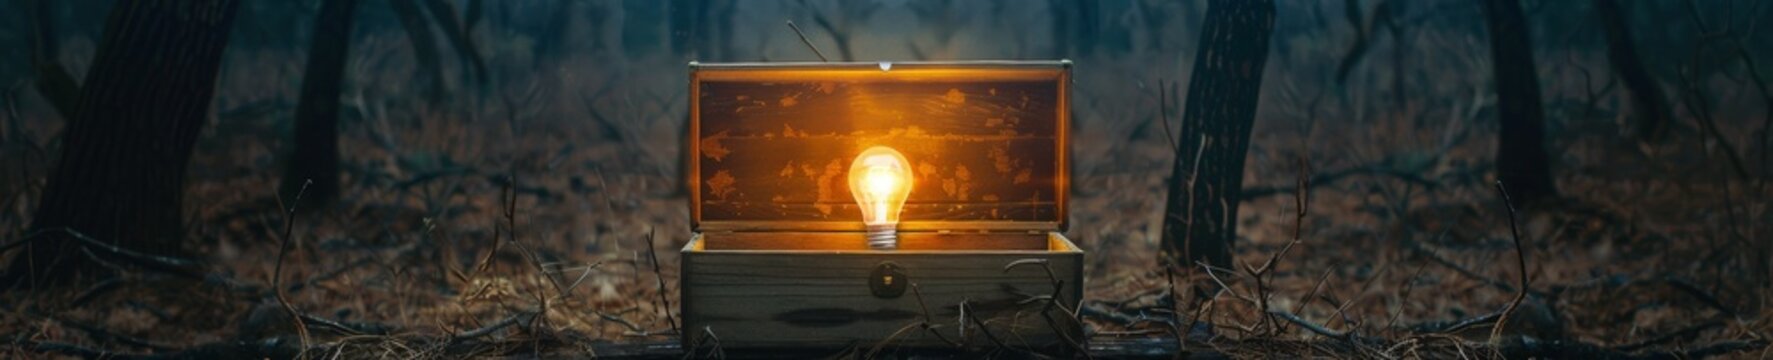 Opened rustic box in a forest clearing at twilight a single lightbulb glowing intensely inside